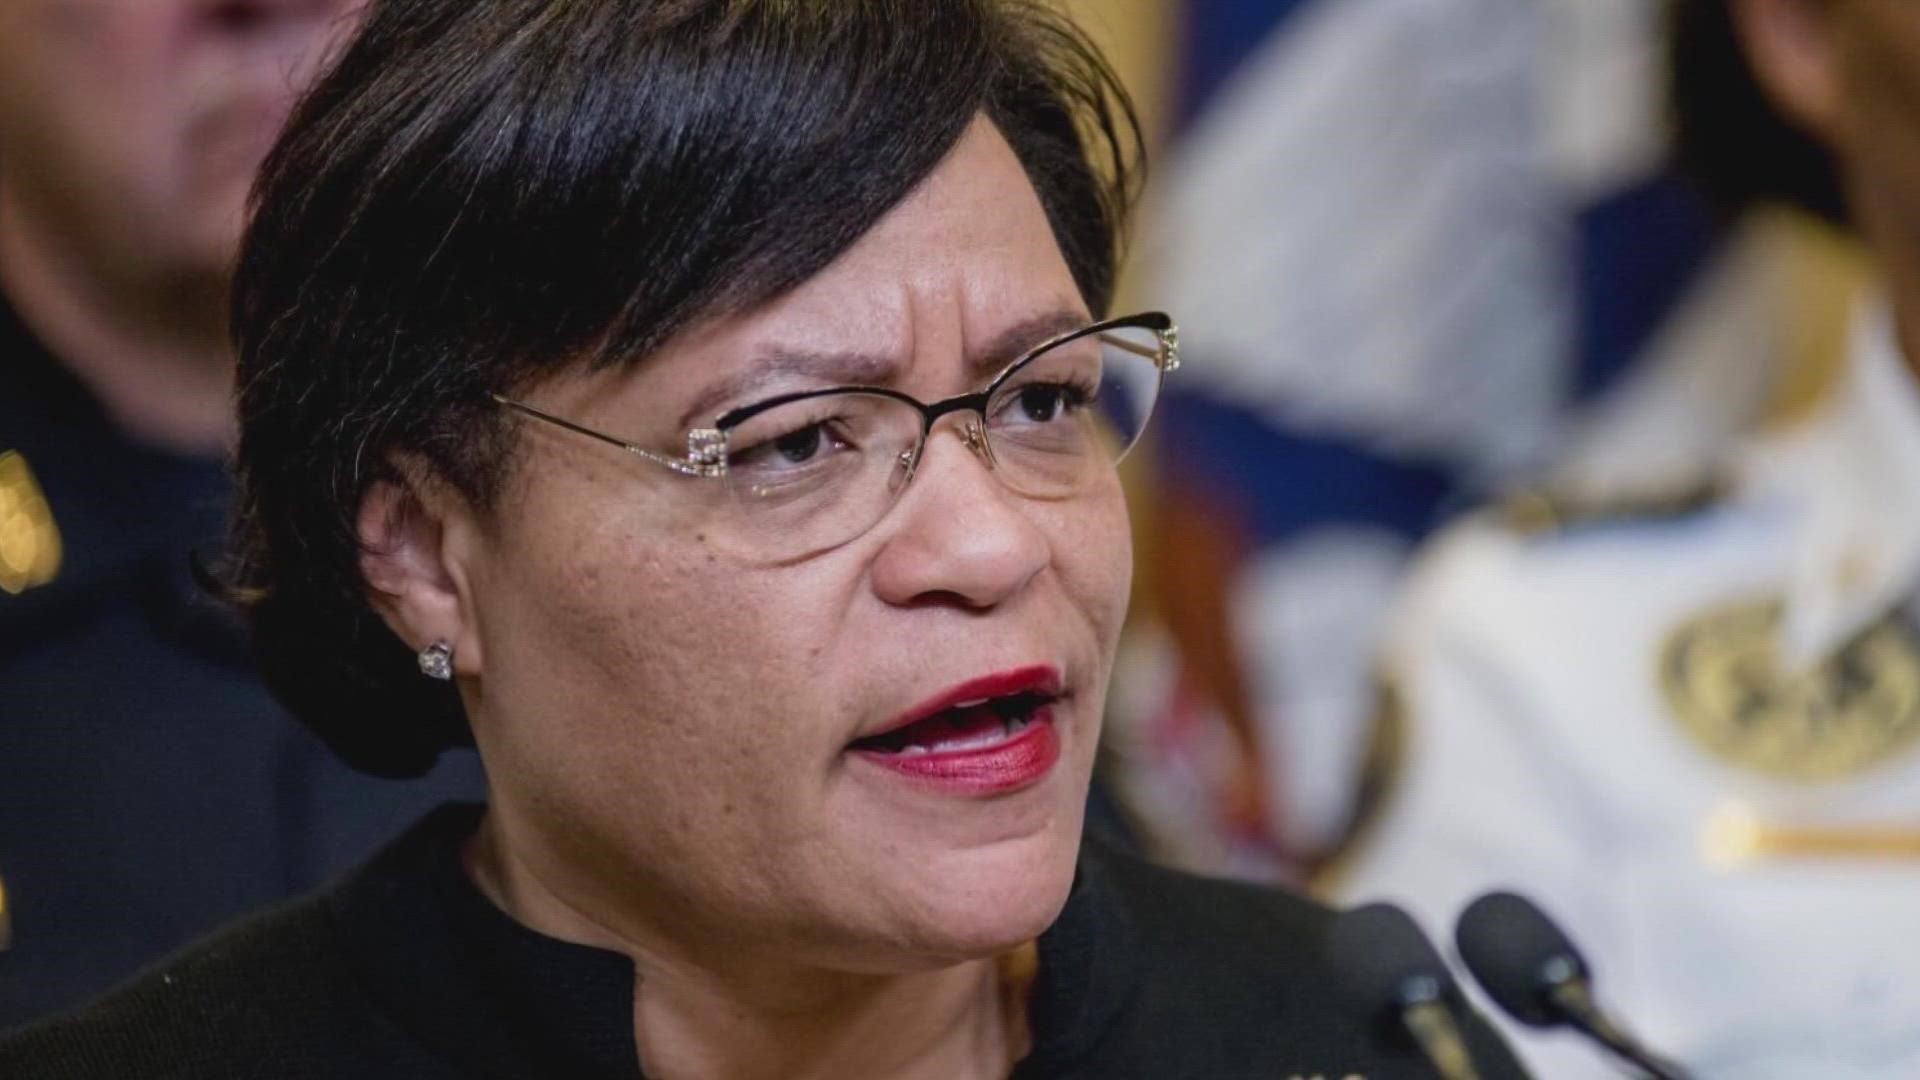 The story of Mayor LaToya Cantrell appearing in juvenile court in support of a family of a teen carjacker has gotten a lot of criticism.